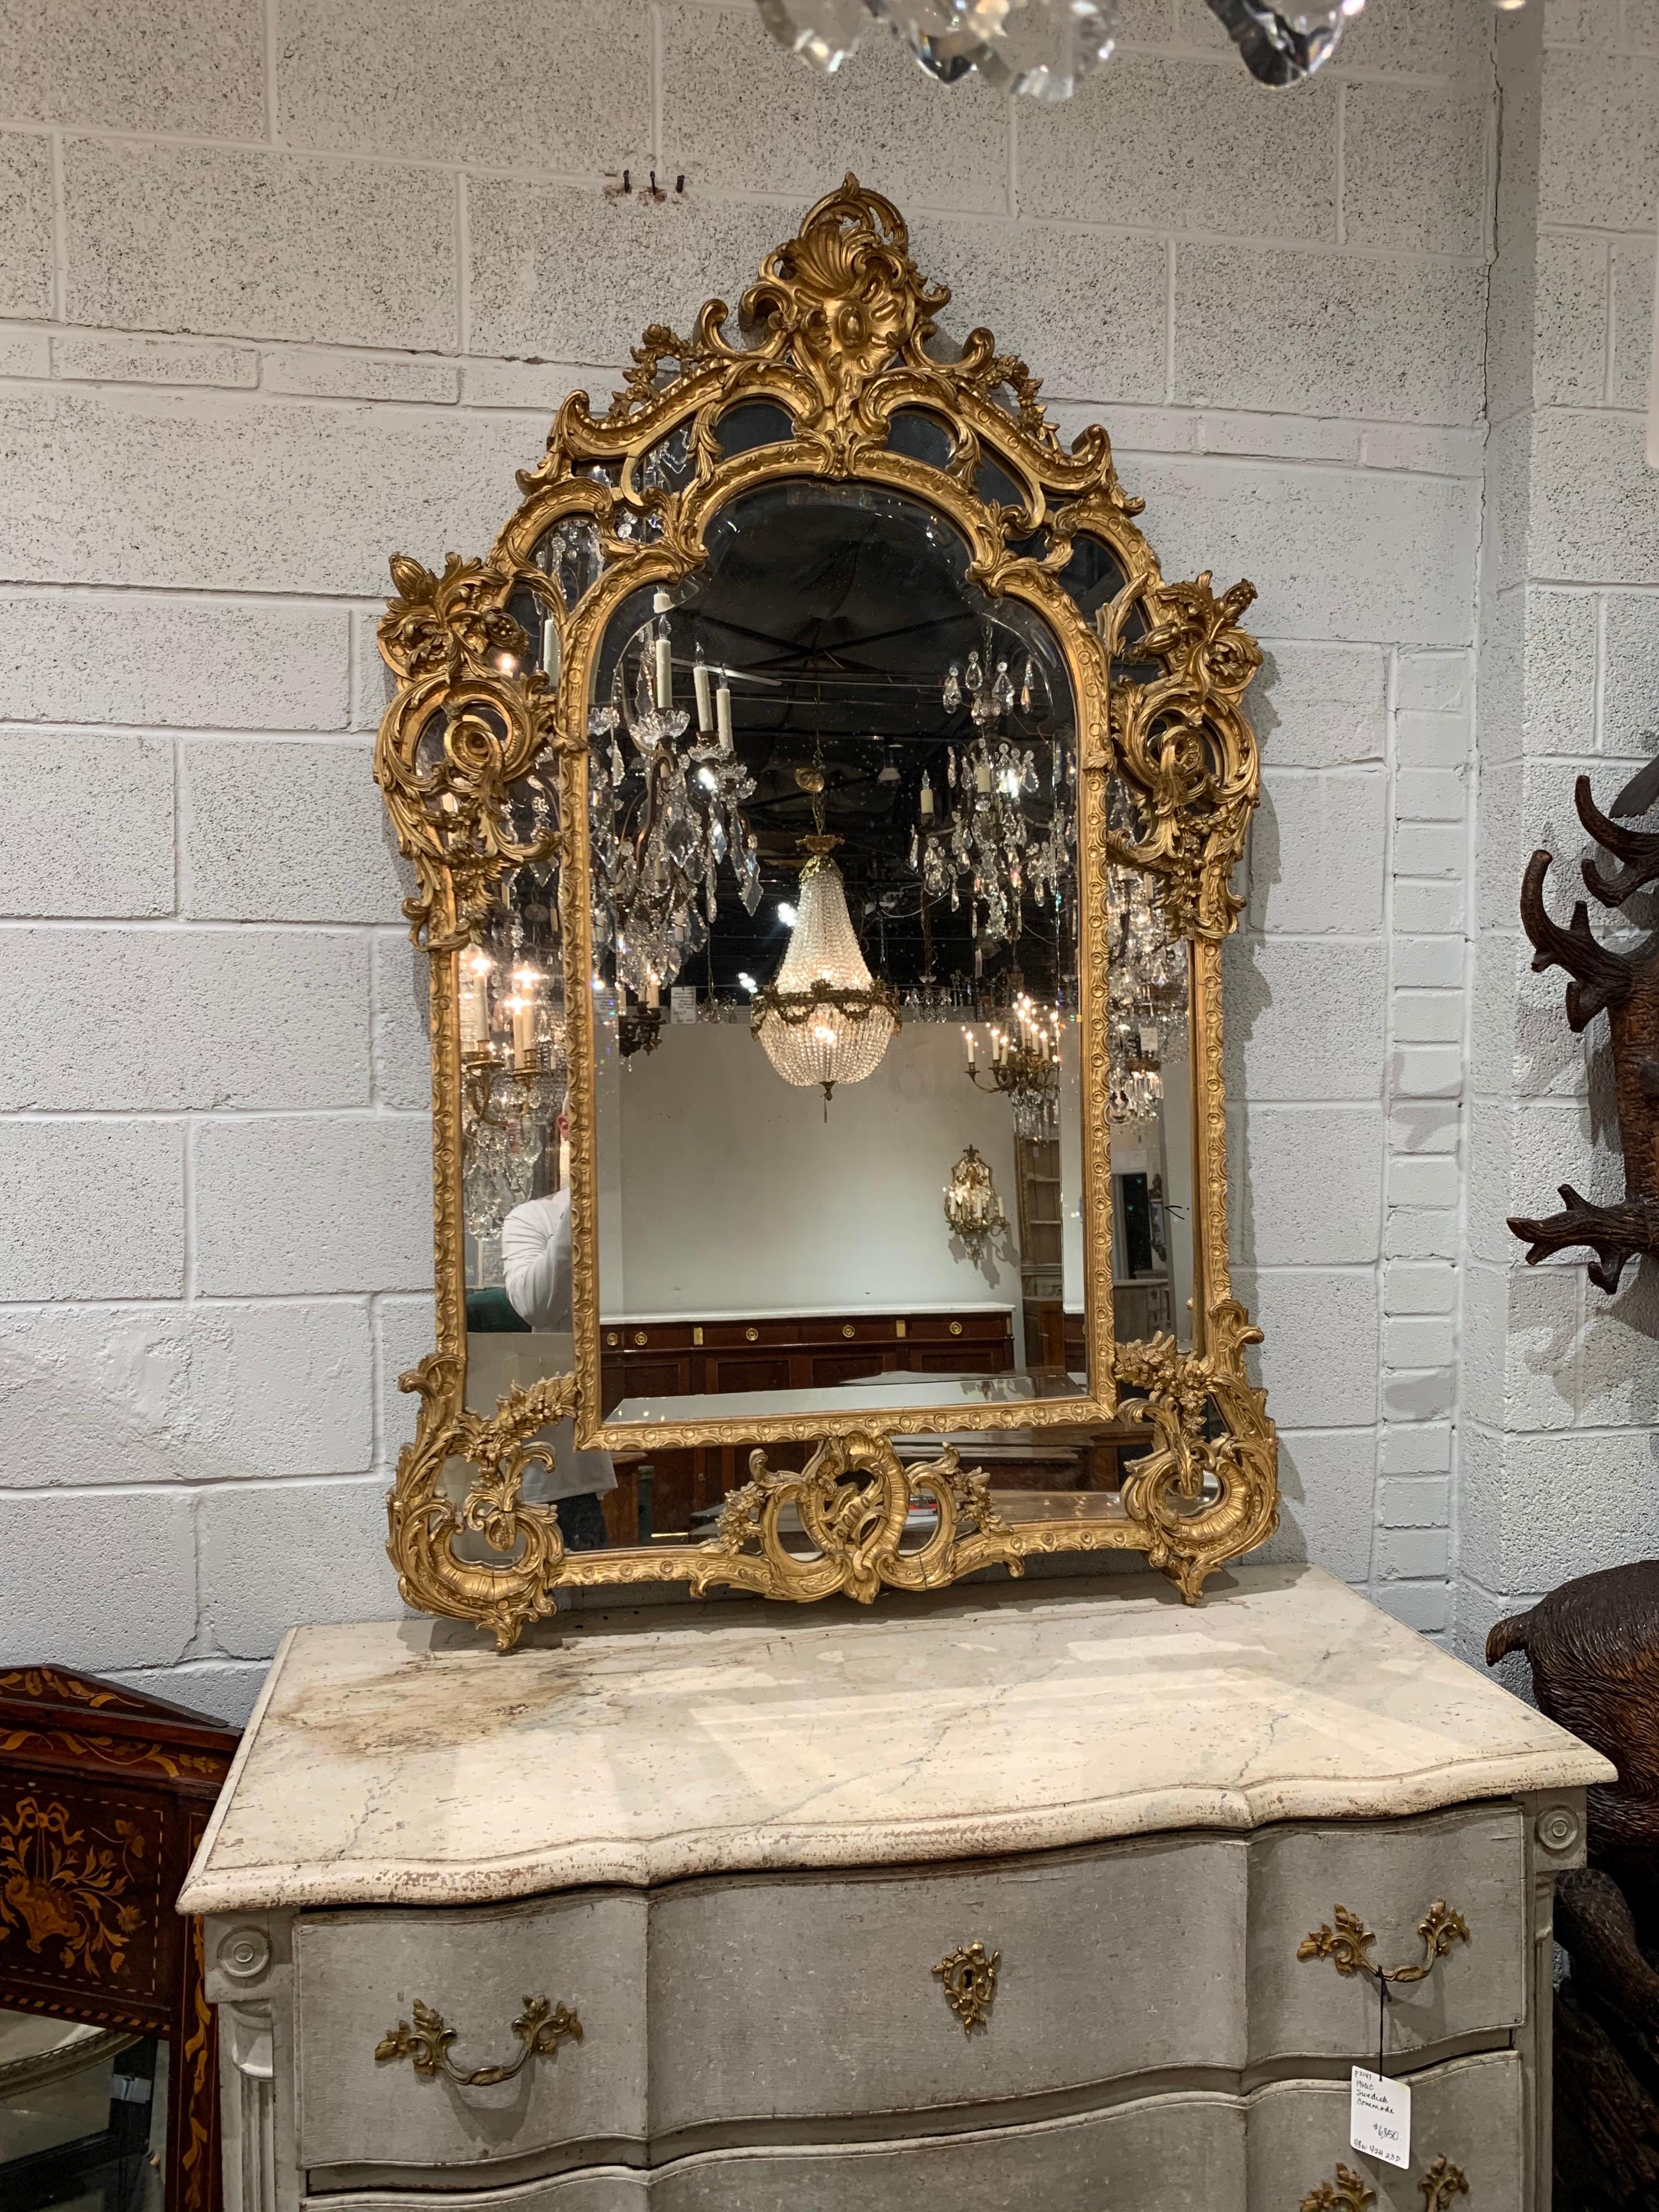 Fabulous 19th century French carved giltwood Rococo mirror. Superb carvings of floral images, scrolls and an elaborate crest at the top. A truly impressive work of art!